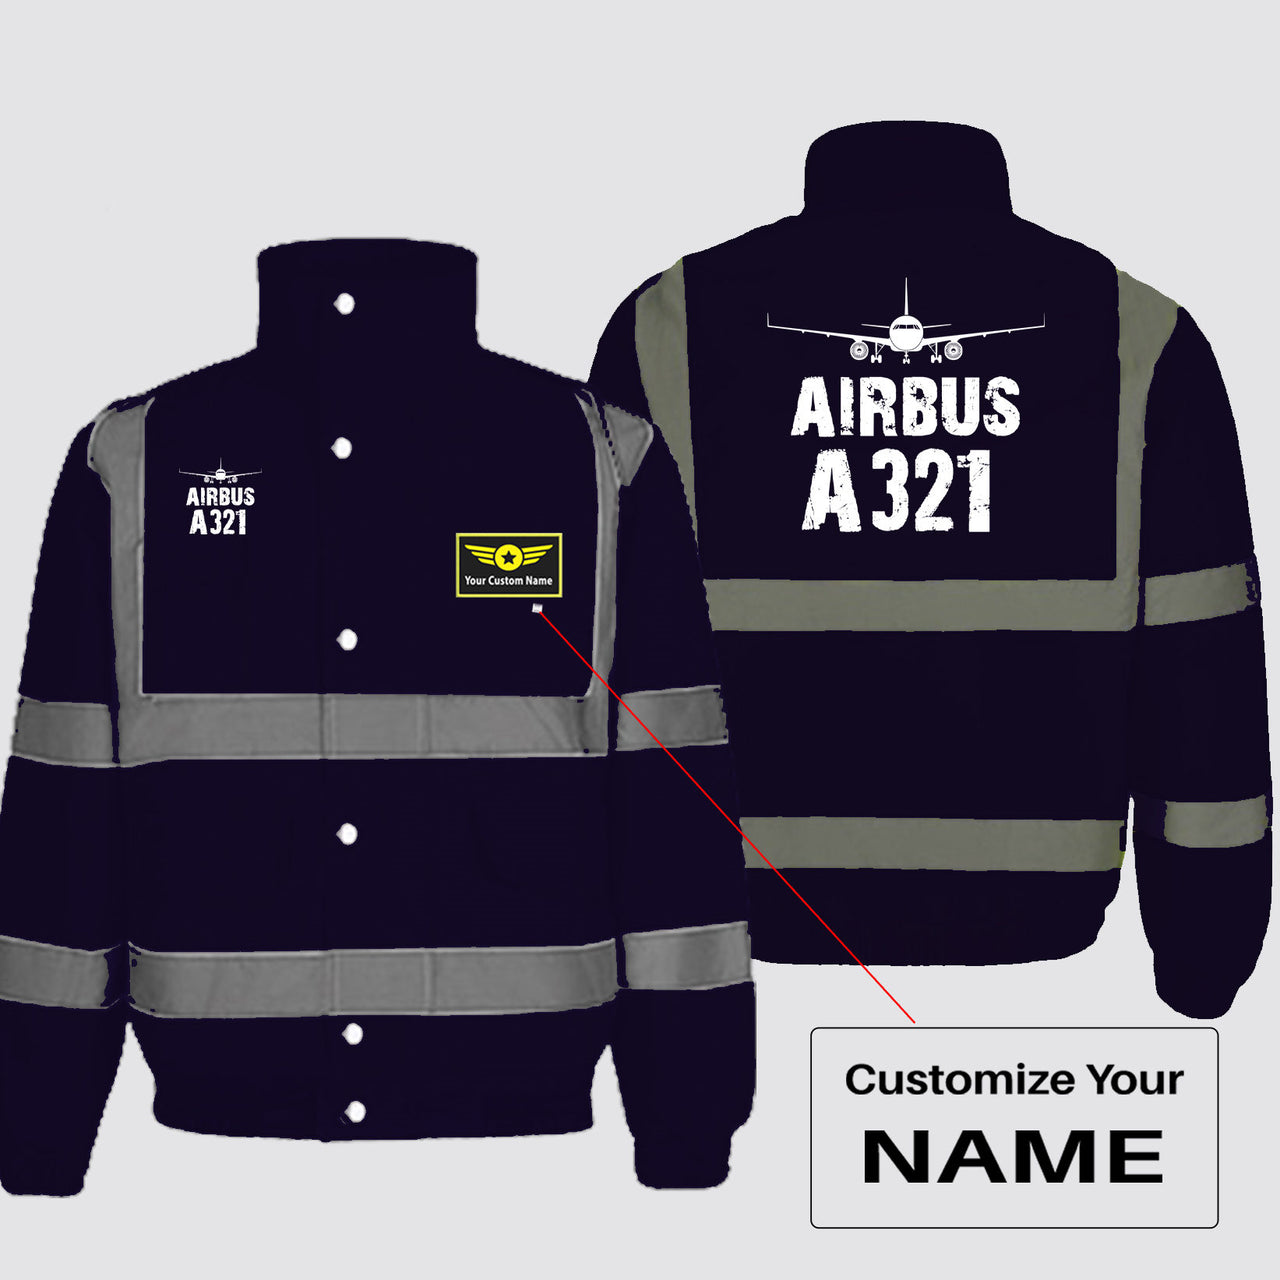 Airbus A321 & Plane Designed Reflective Winter Jackets